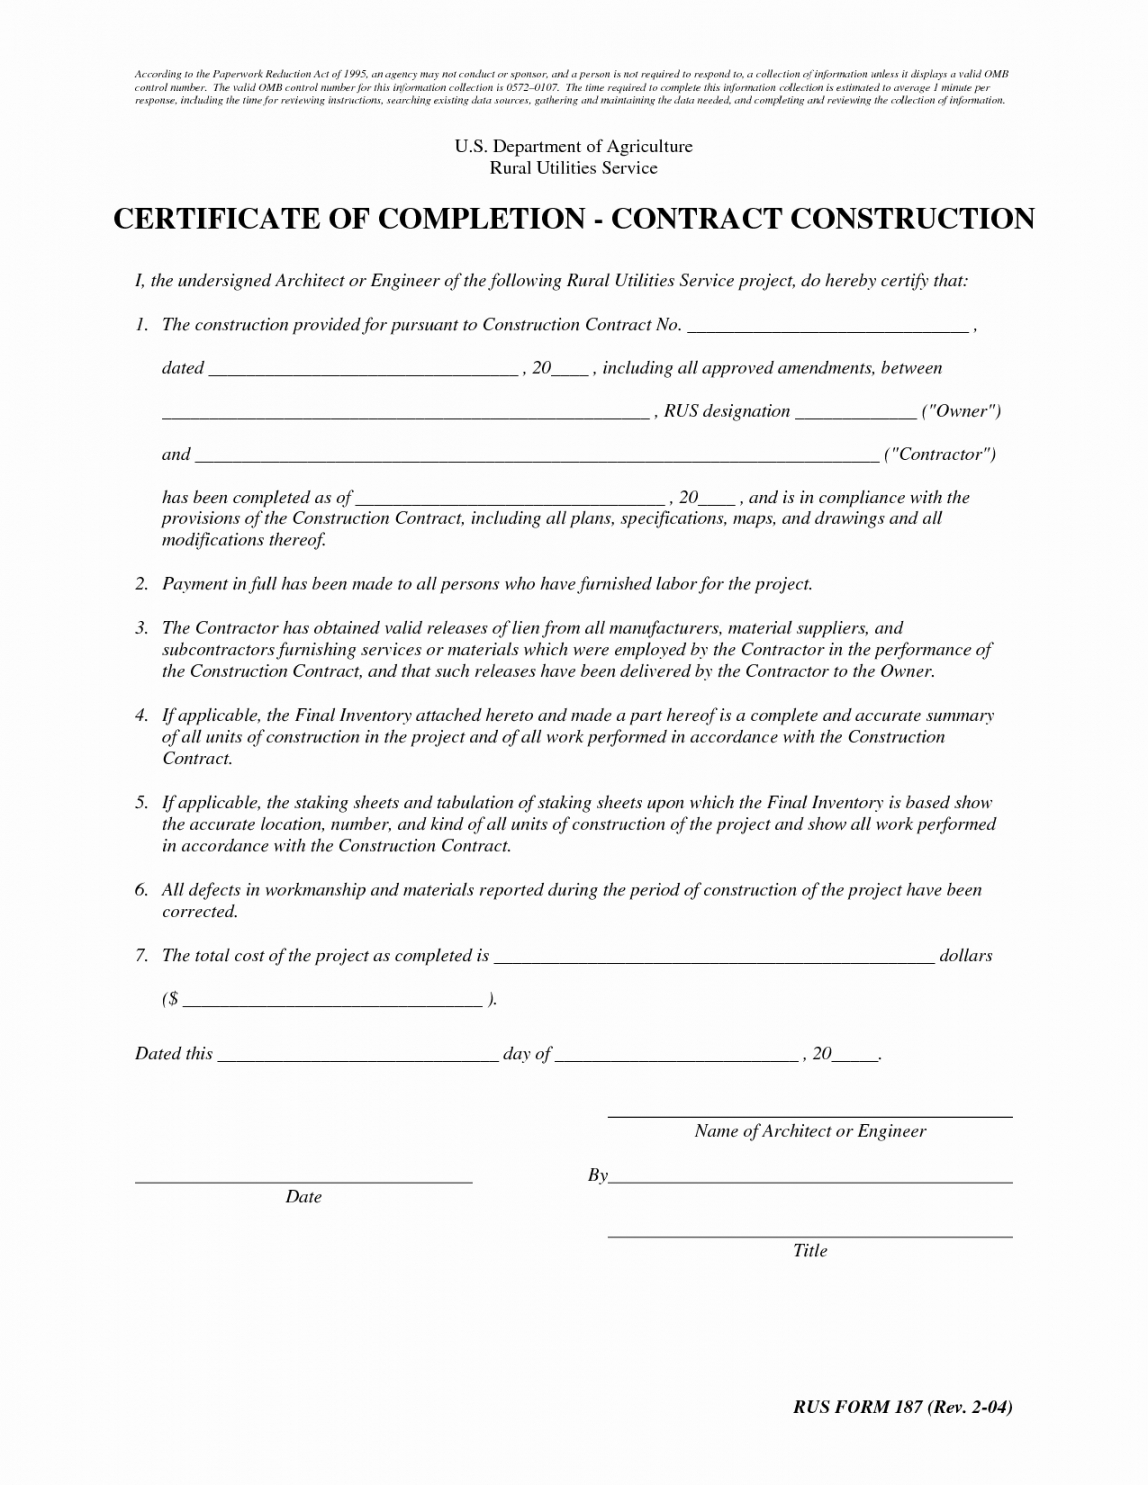 Free Certificate Of Completion Template Construction Design Inside Certificate Of Completion Template Construction